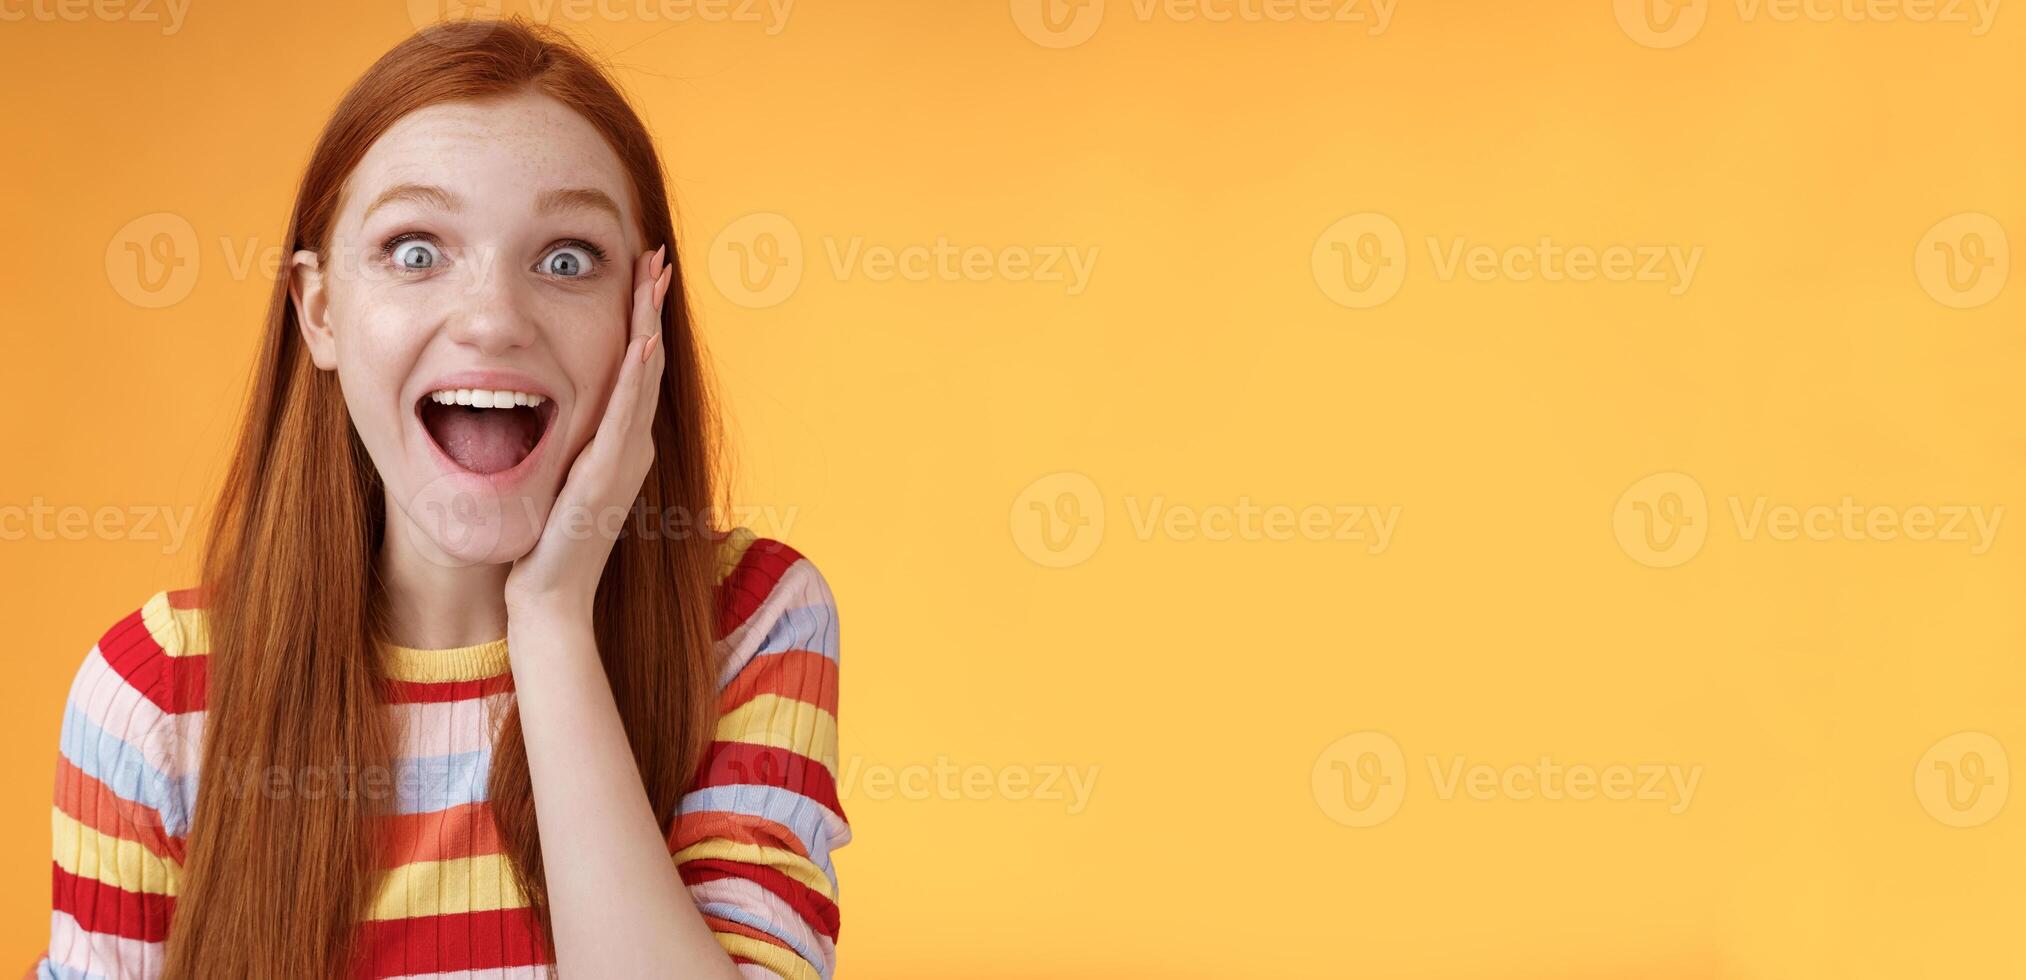 Amused happy smiling good-looking redhead woman screaming happily touch cheek astonished receive good perfect news triumphing feeling excited look thrilled camera, standing orange background photo